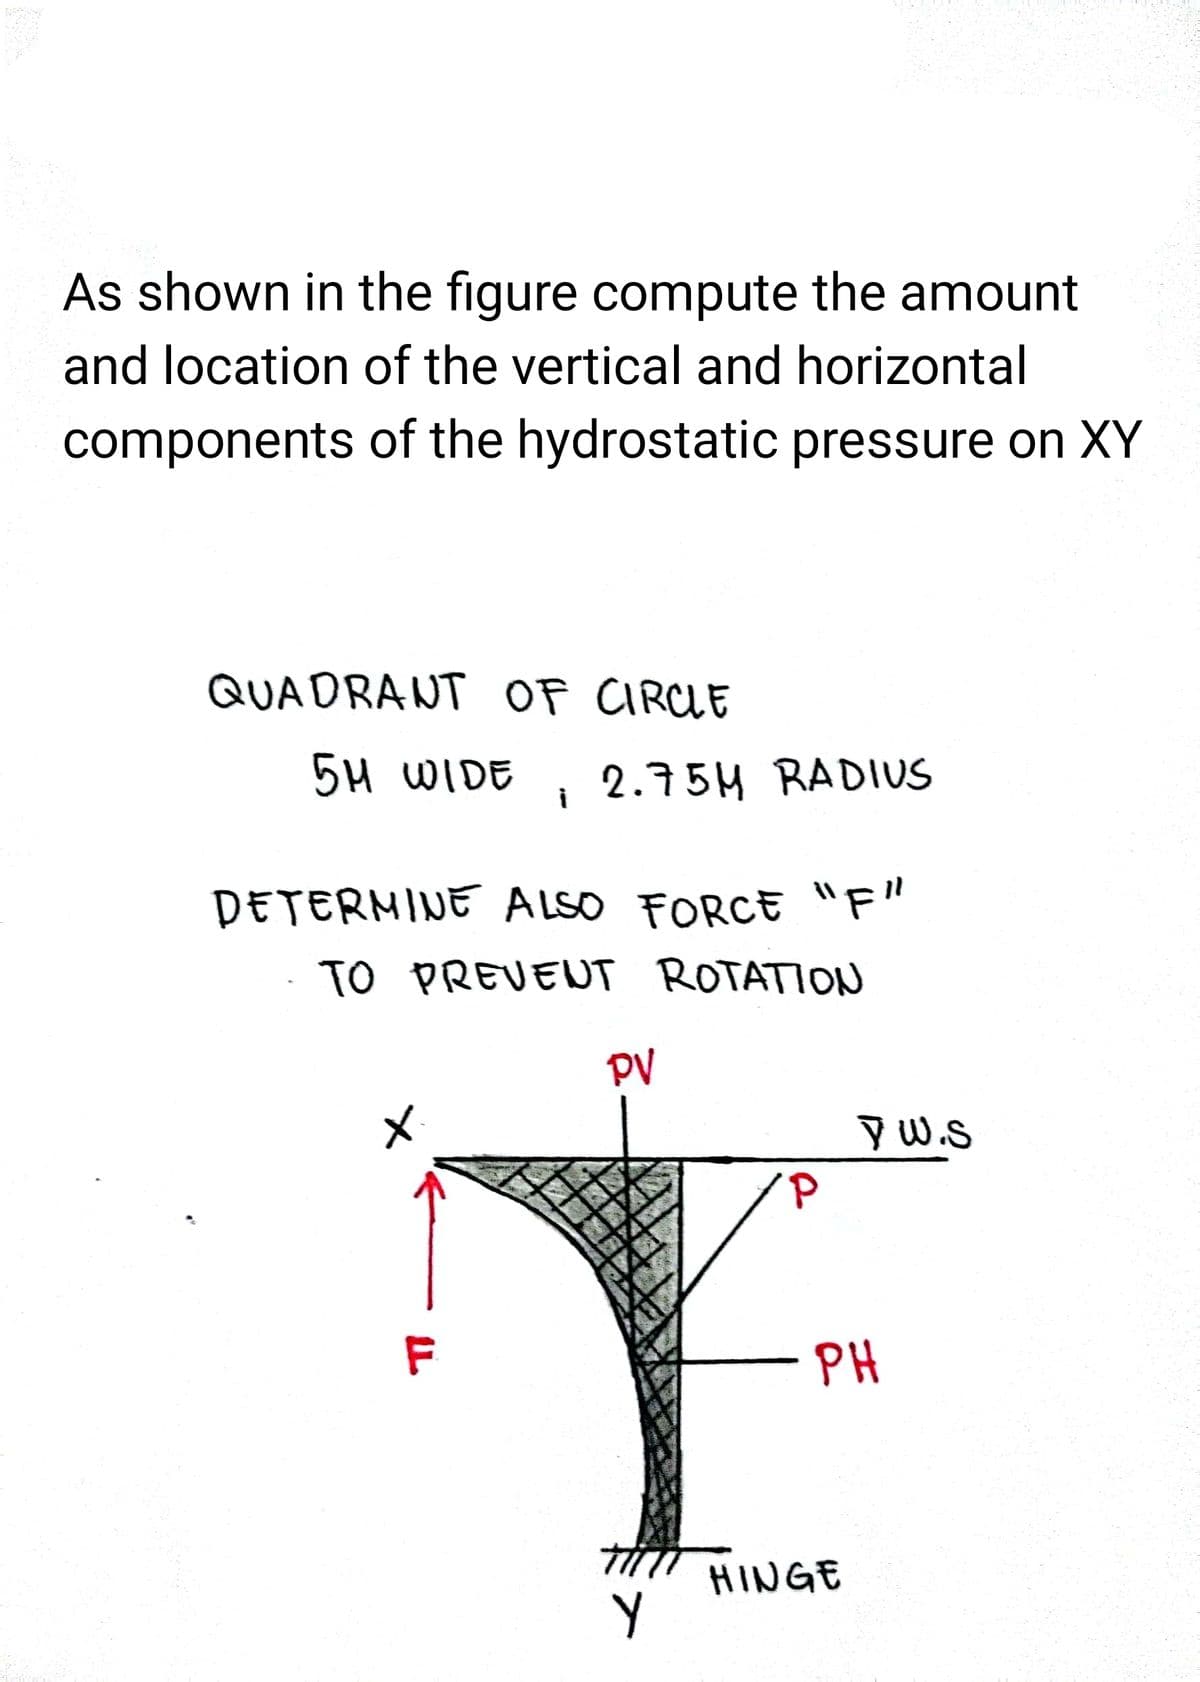 As shown in the figure compute the amount
and location of the vertical and horizontal
components
of the hydrostatic pressure on XY
QUADRANT OF CIRCLE
5M WIDE 2.75H RADIUS
i
DETERMINE ALSO FORCE "F"
TO PREVENT ROTATION
F
PV
Y
yW.S
PH
HINGE